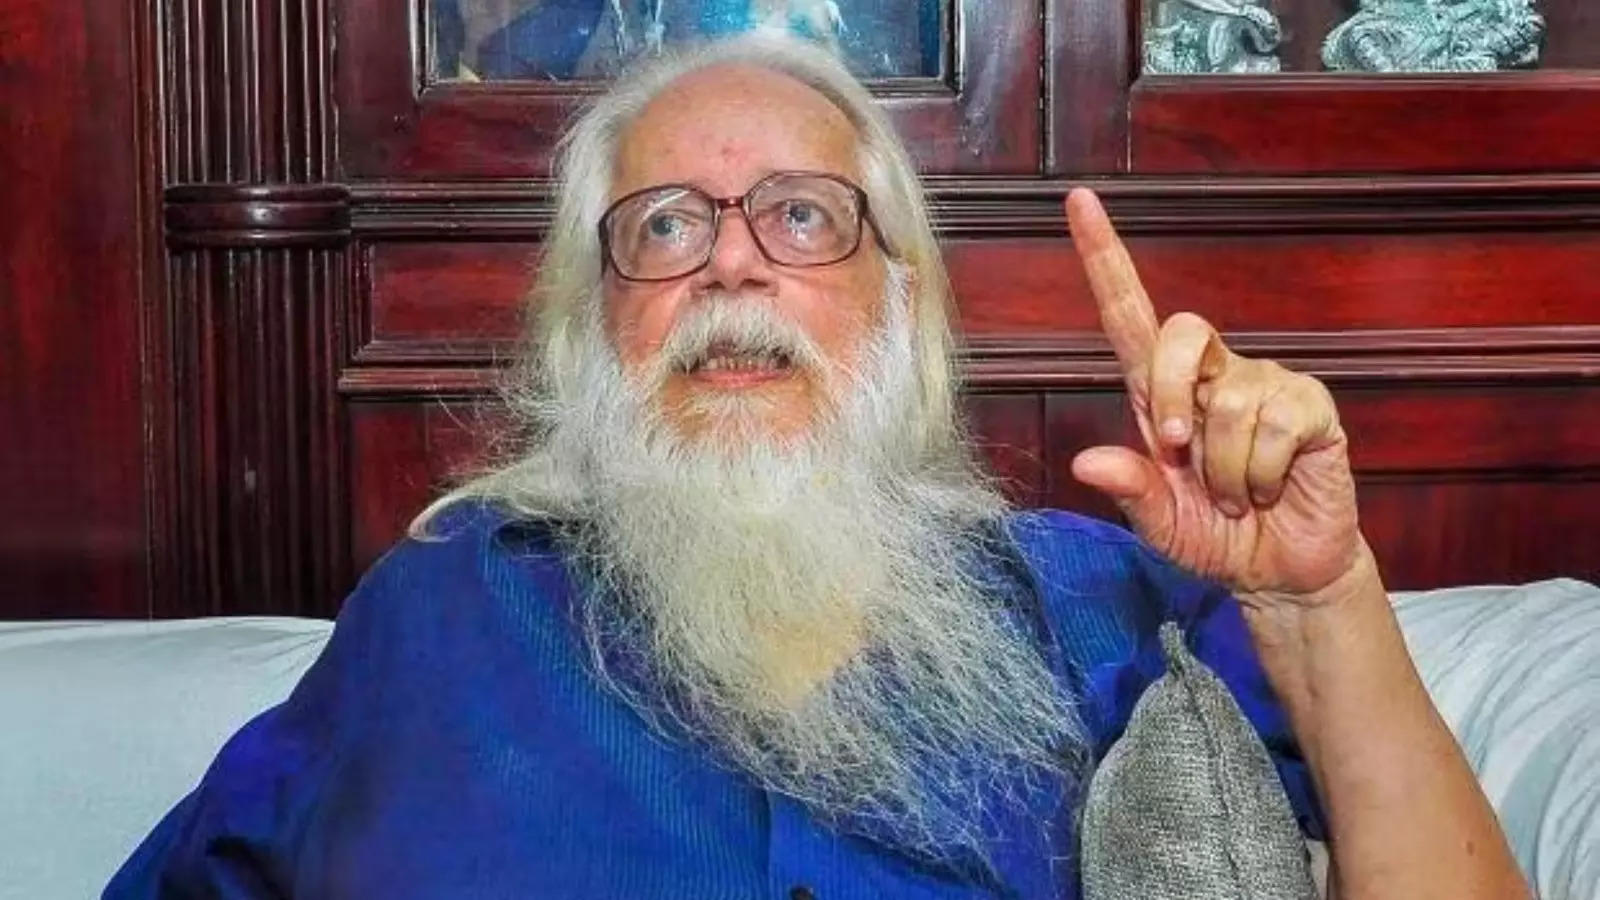 CBI files chargesheet against 5 officials in ISRO espionage case, accused of framing scientist Nambi Narayanan